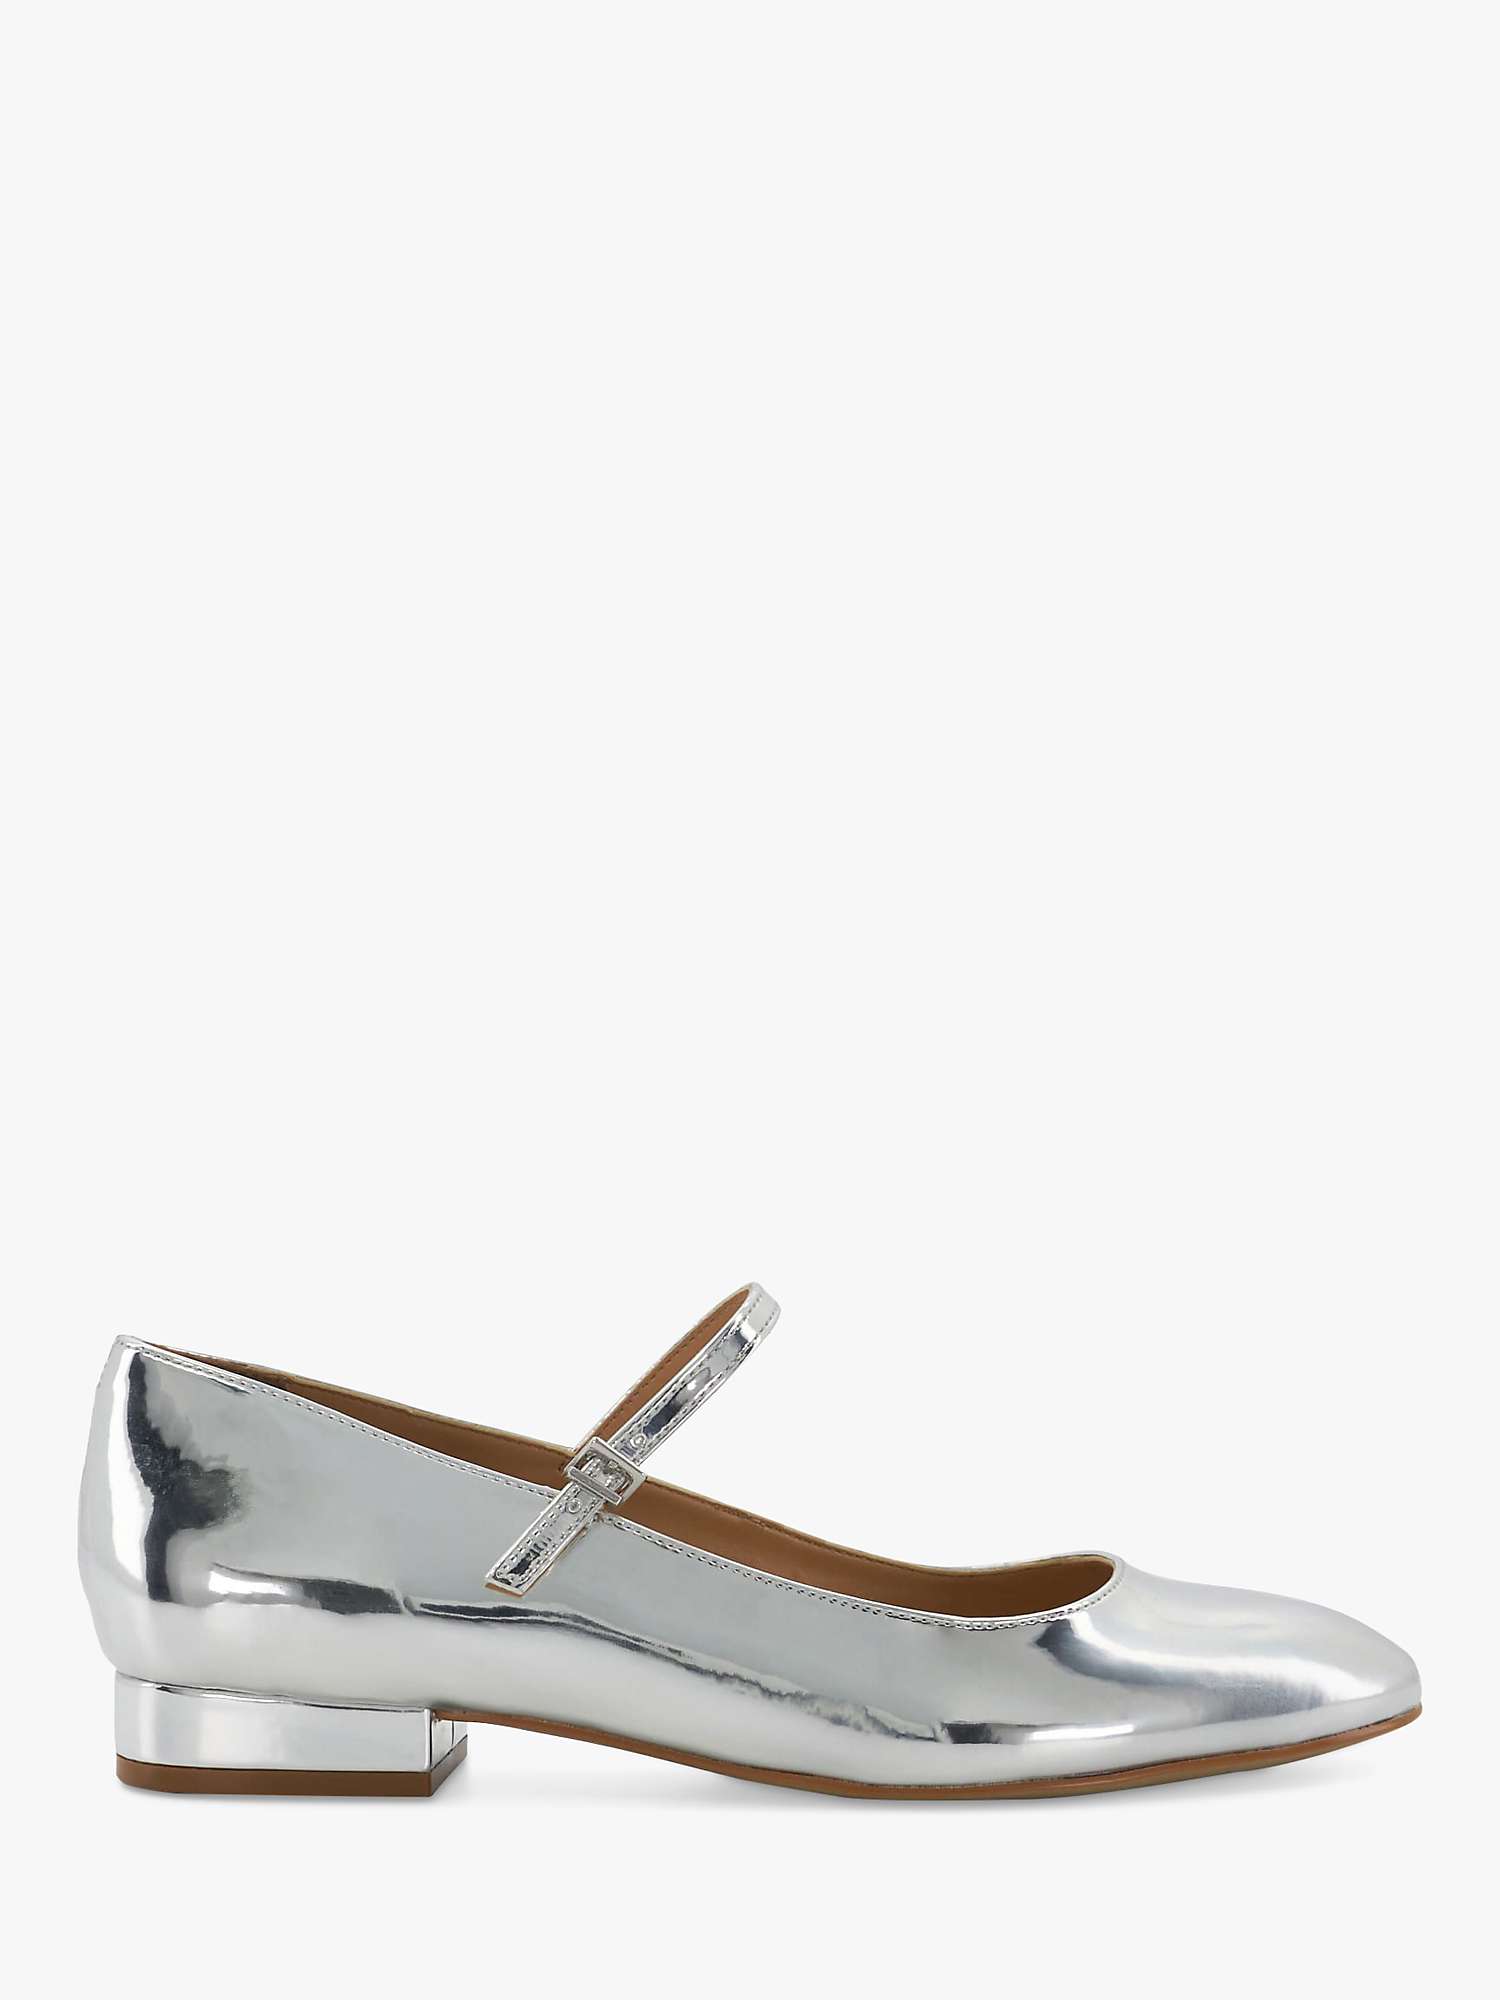 Buy Dune Hipplie Mary Jane Shoes Online at johnlewis.com